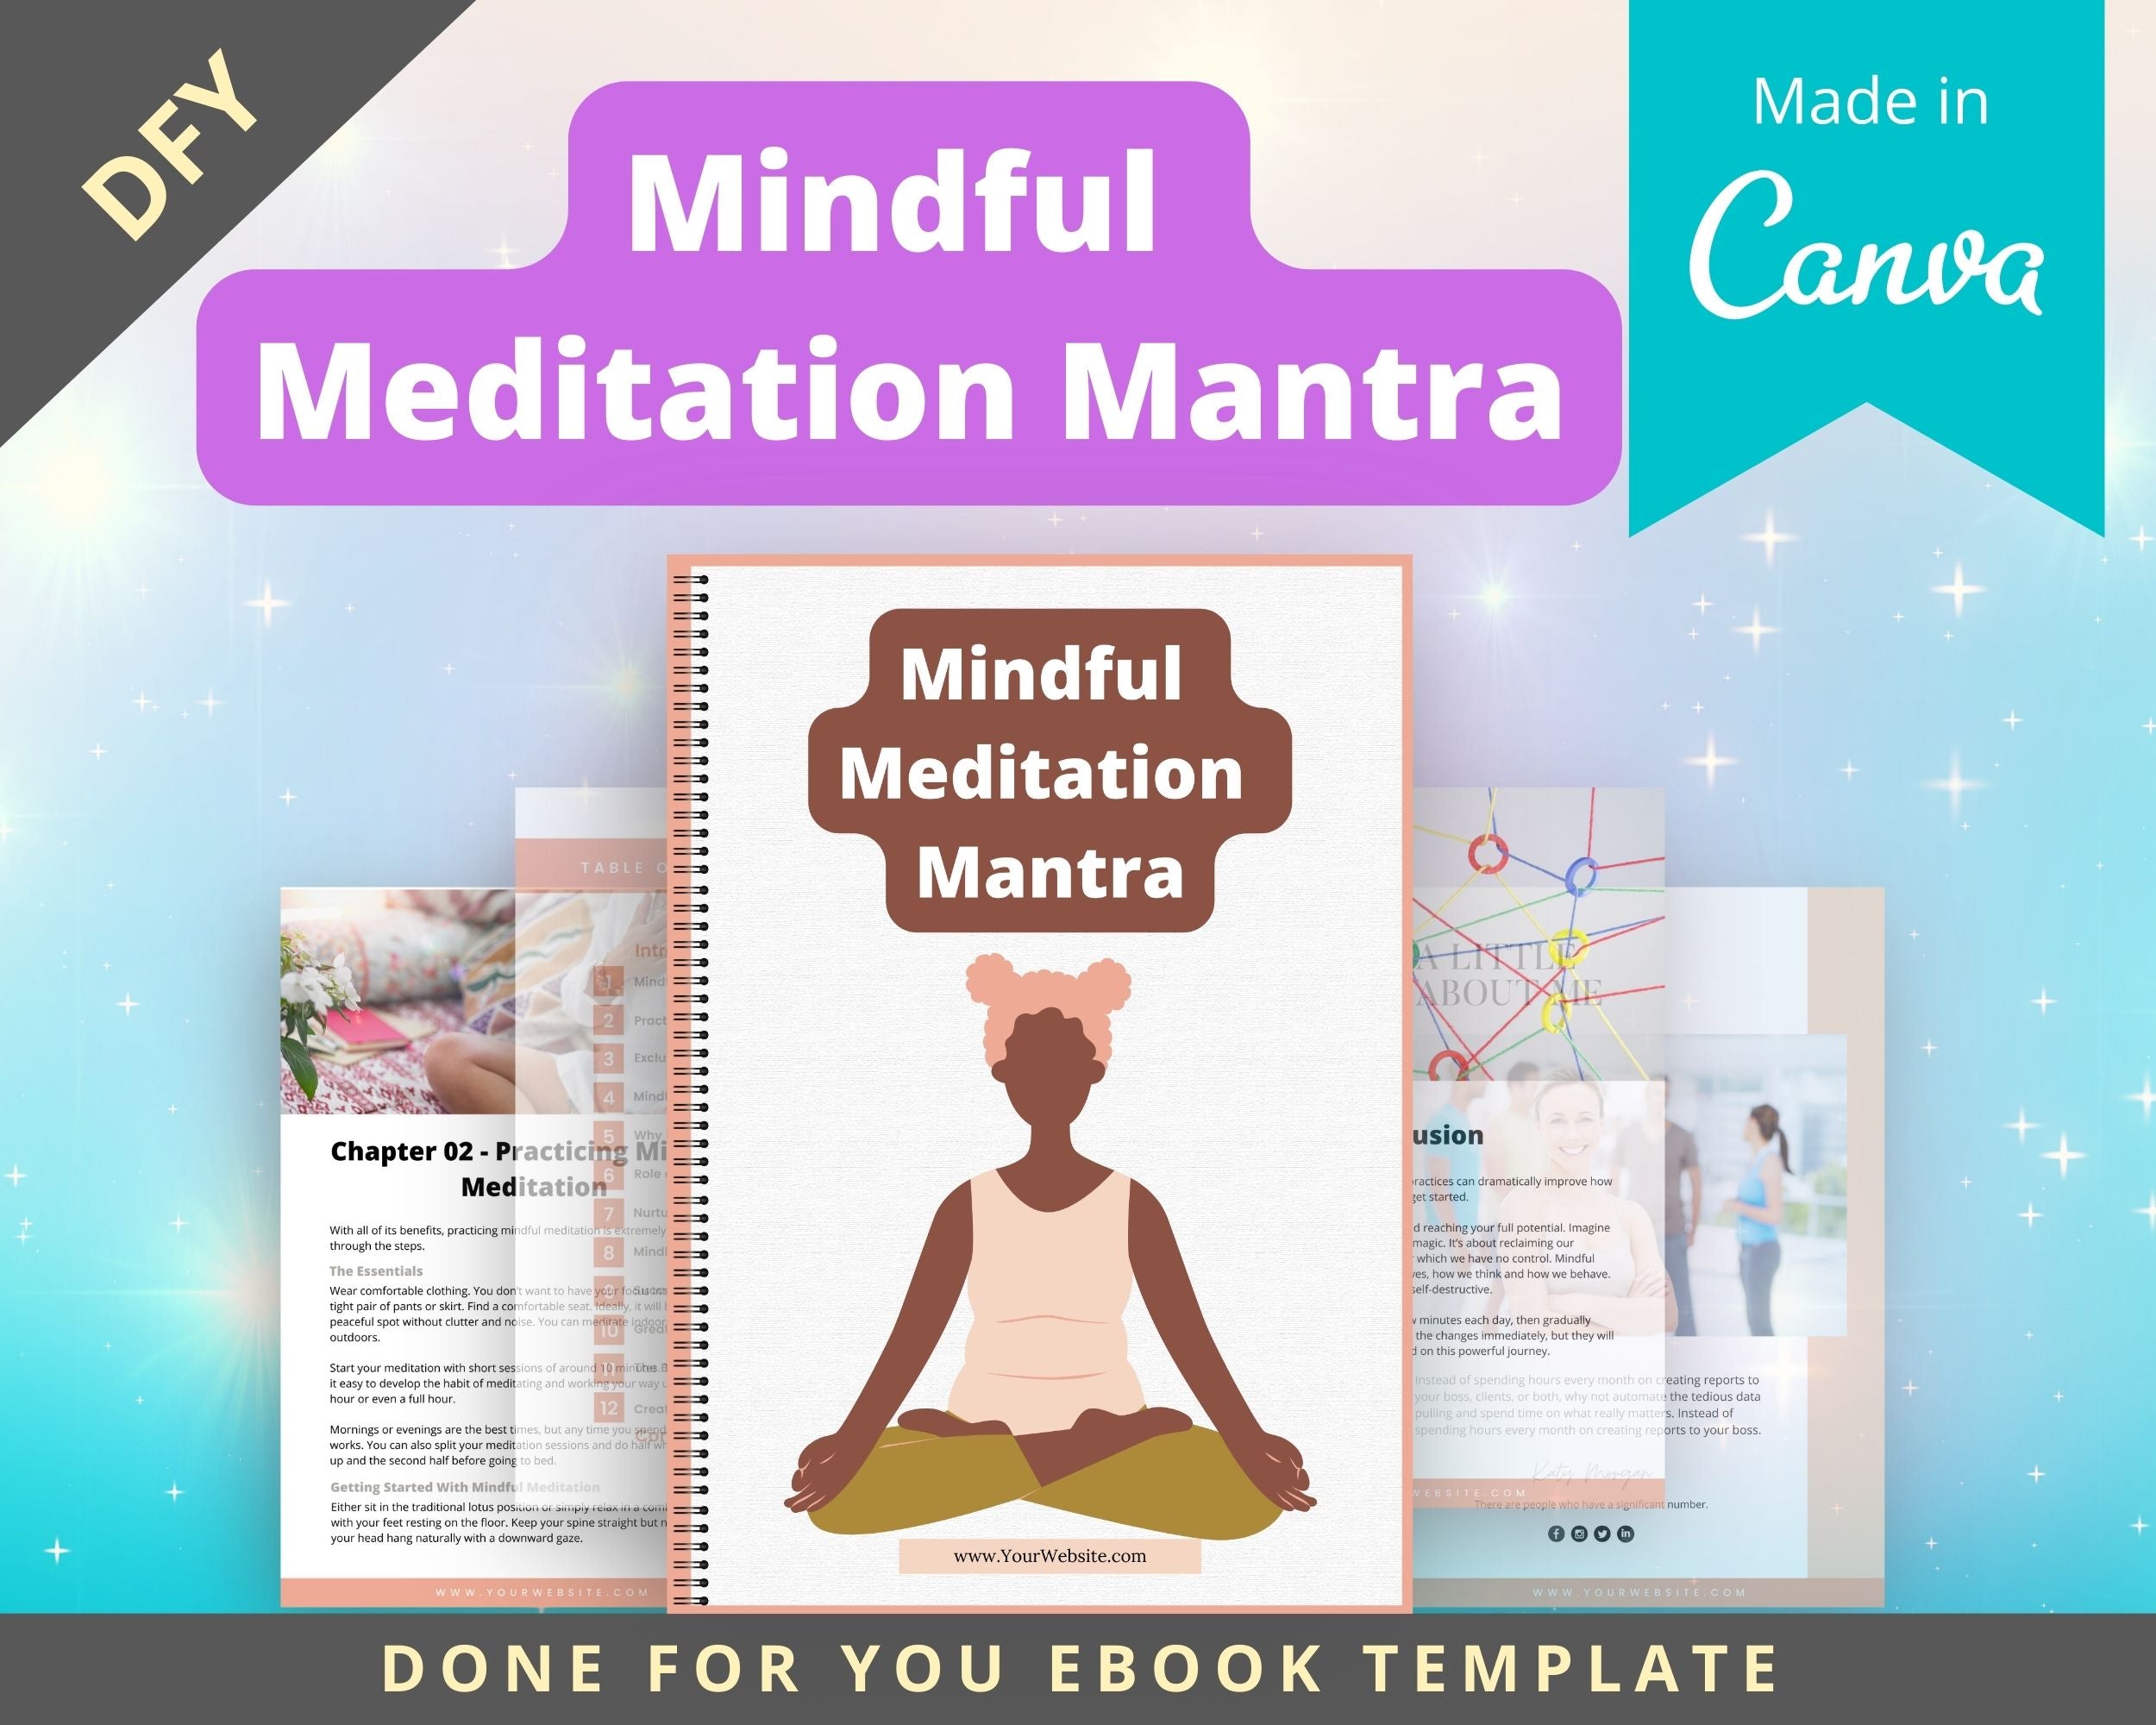 Editable Mindful Meditation Mantra Ebook | Done-for-You Ebook in Canva | Rebrandable and Resizable Canva Template